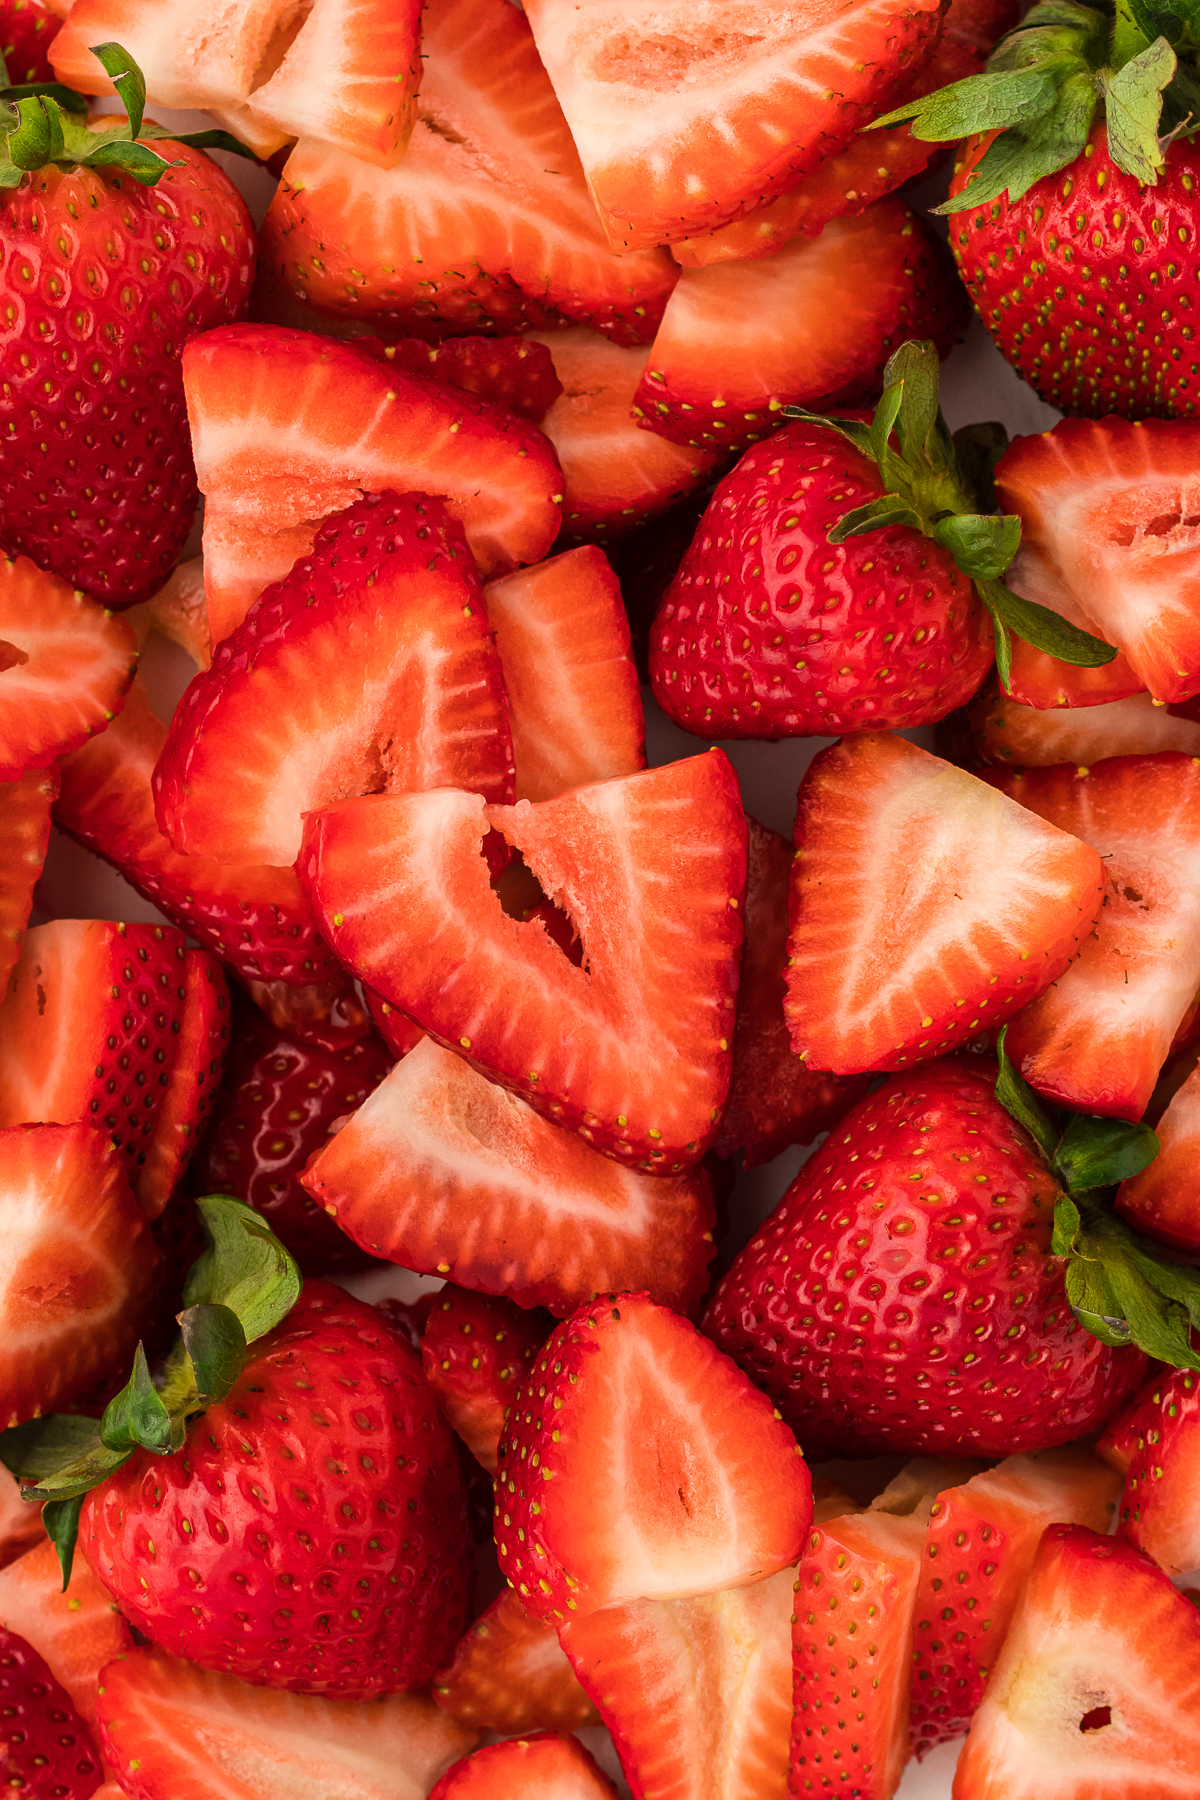 sliced strawberries and whole strawberries